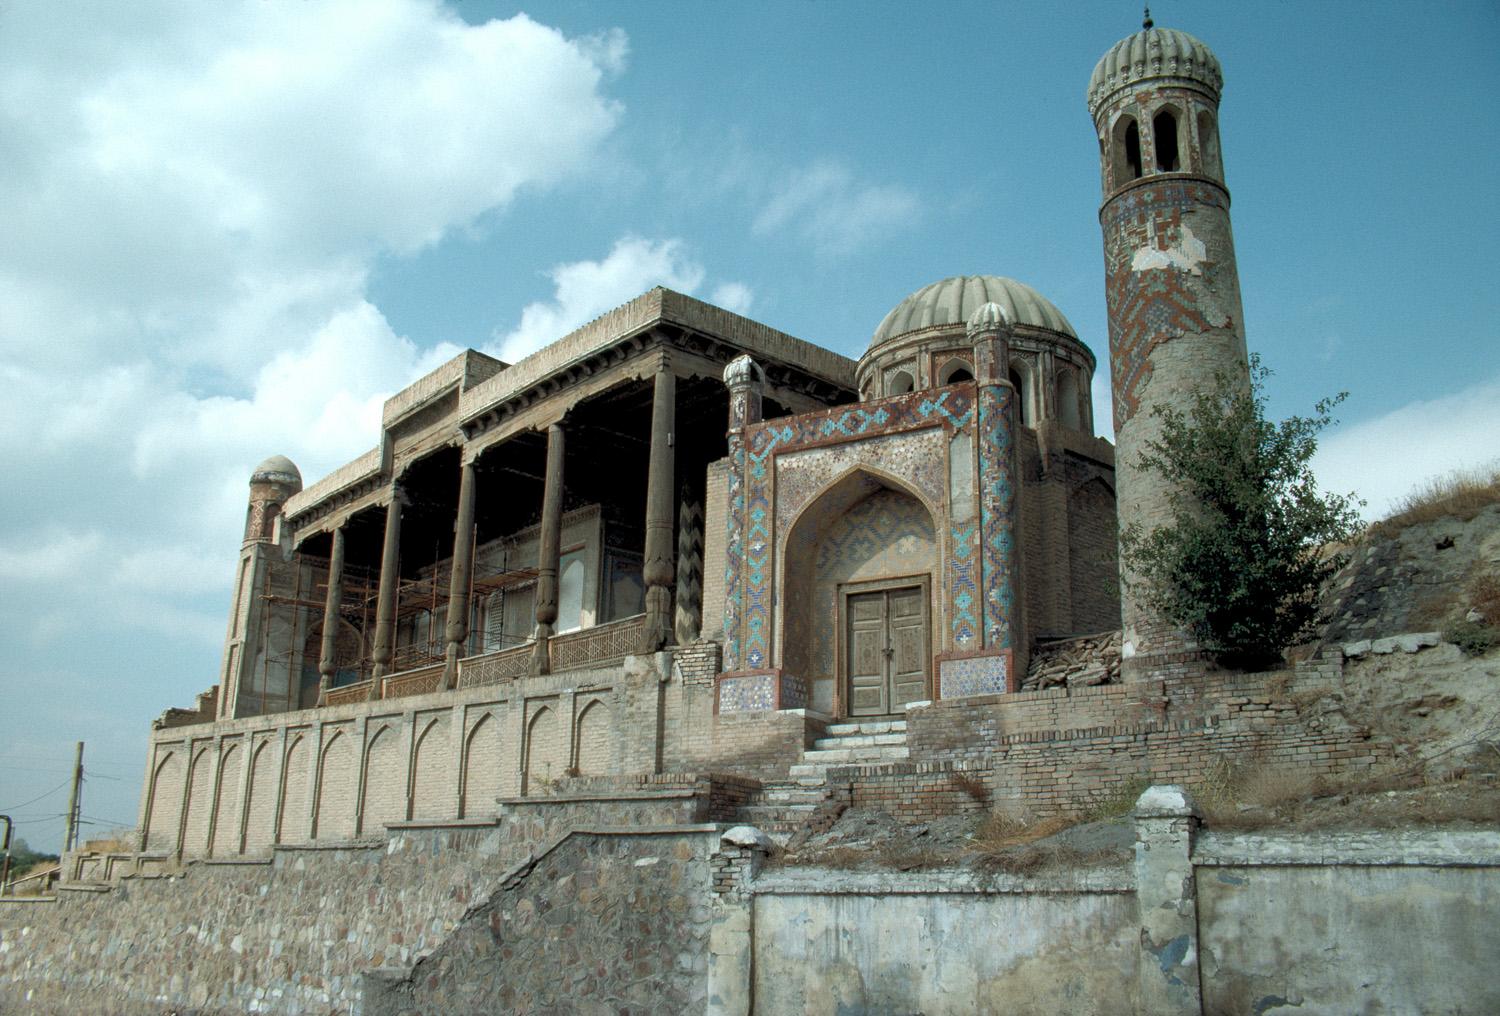 Exterior view of mosque looking towards portico and adjacent tower